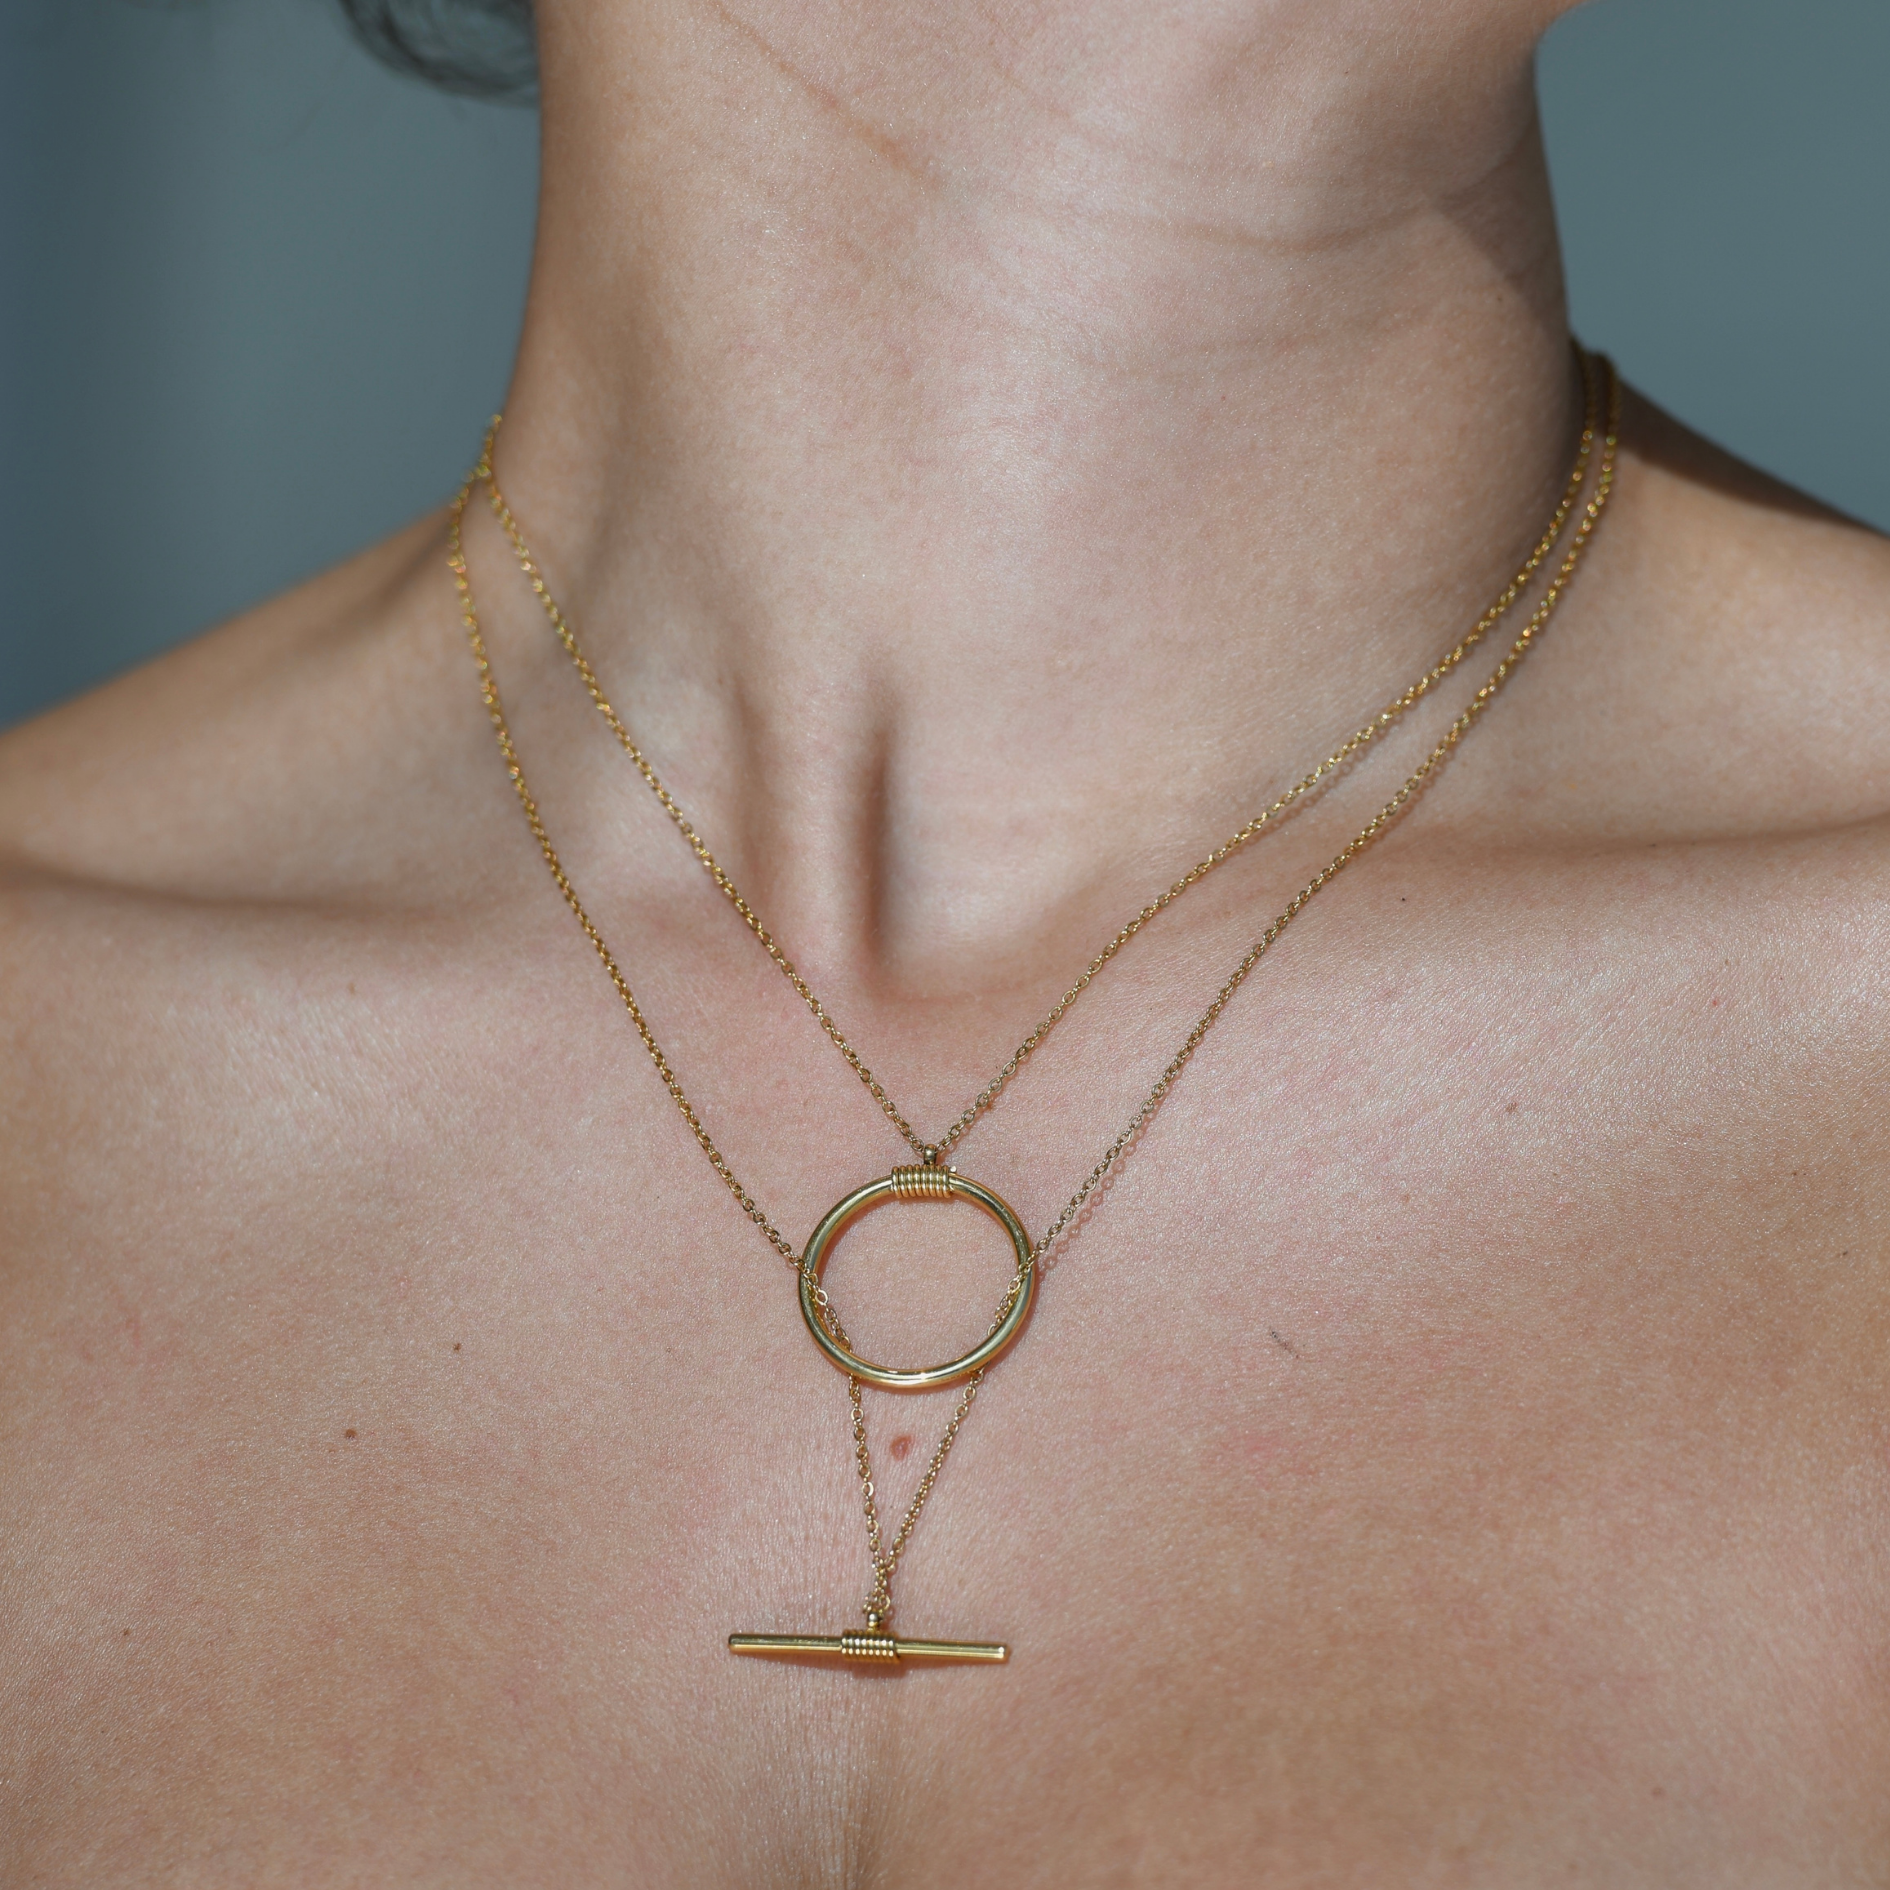 BALANCE Pendants Gold Necklace -gold pendant consisting of two parts. One chain has a metal hanging in the shape of a circle which comes shorter and the other chain has a horizontal metal hanging which comes longe